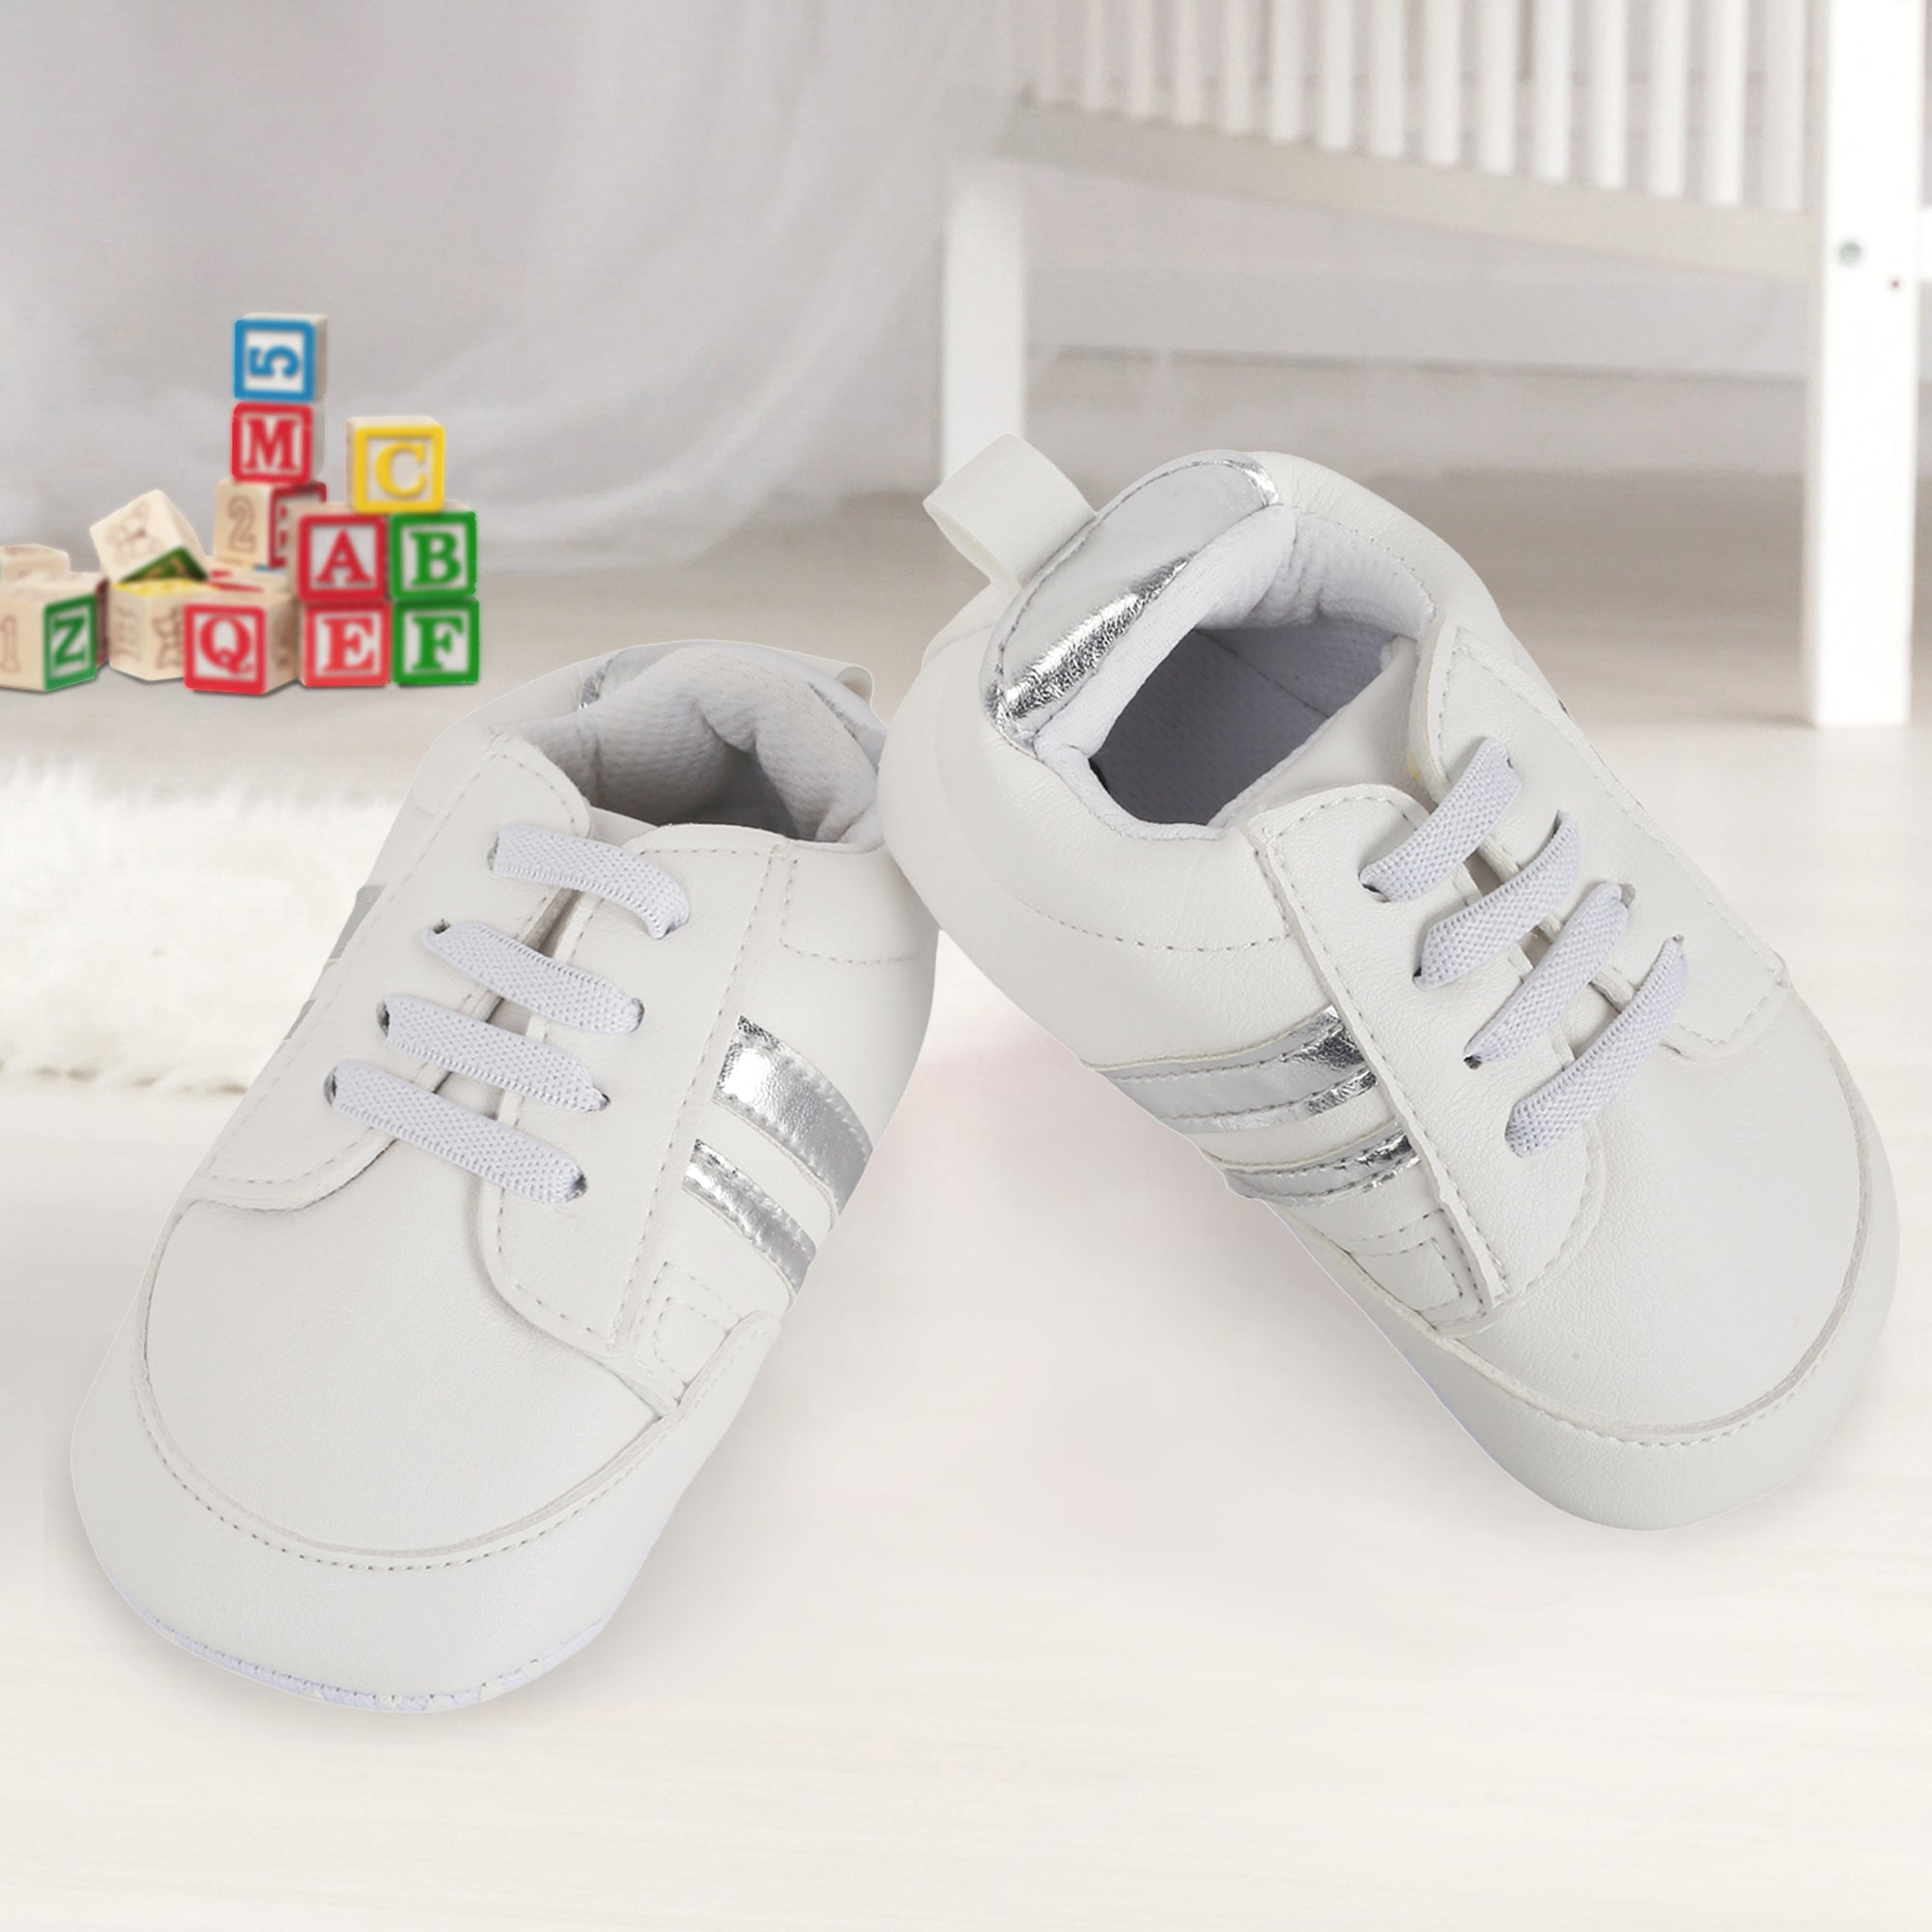 Boys' Shoes & Sneakers